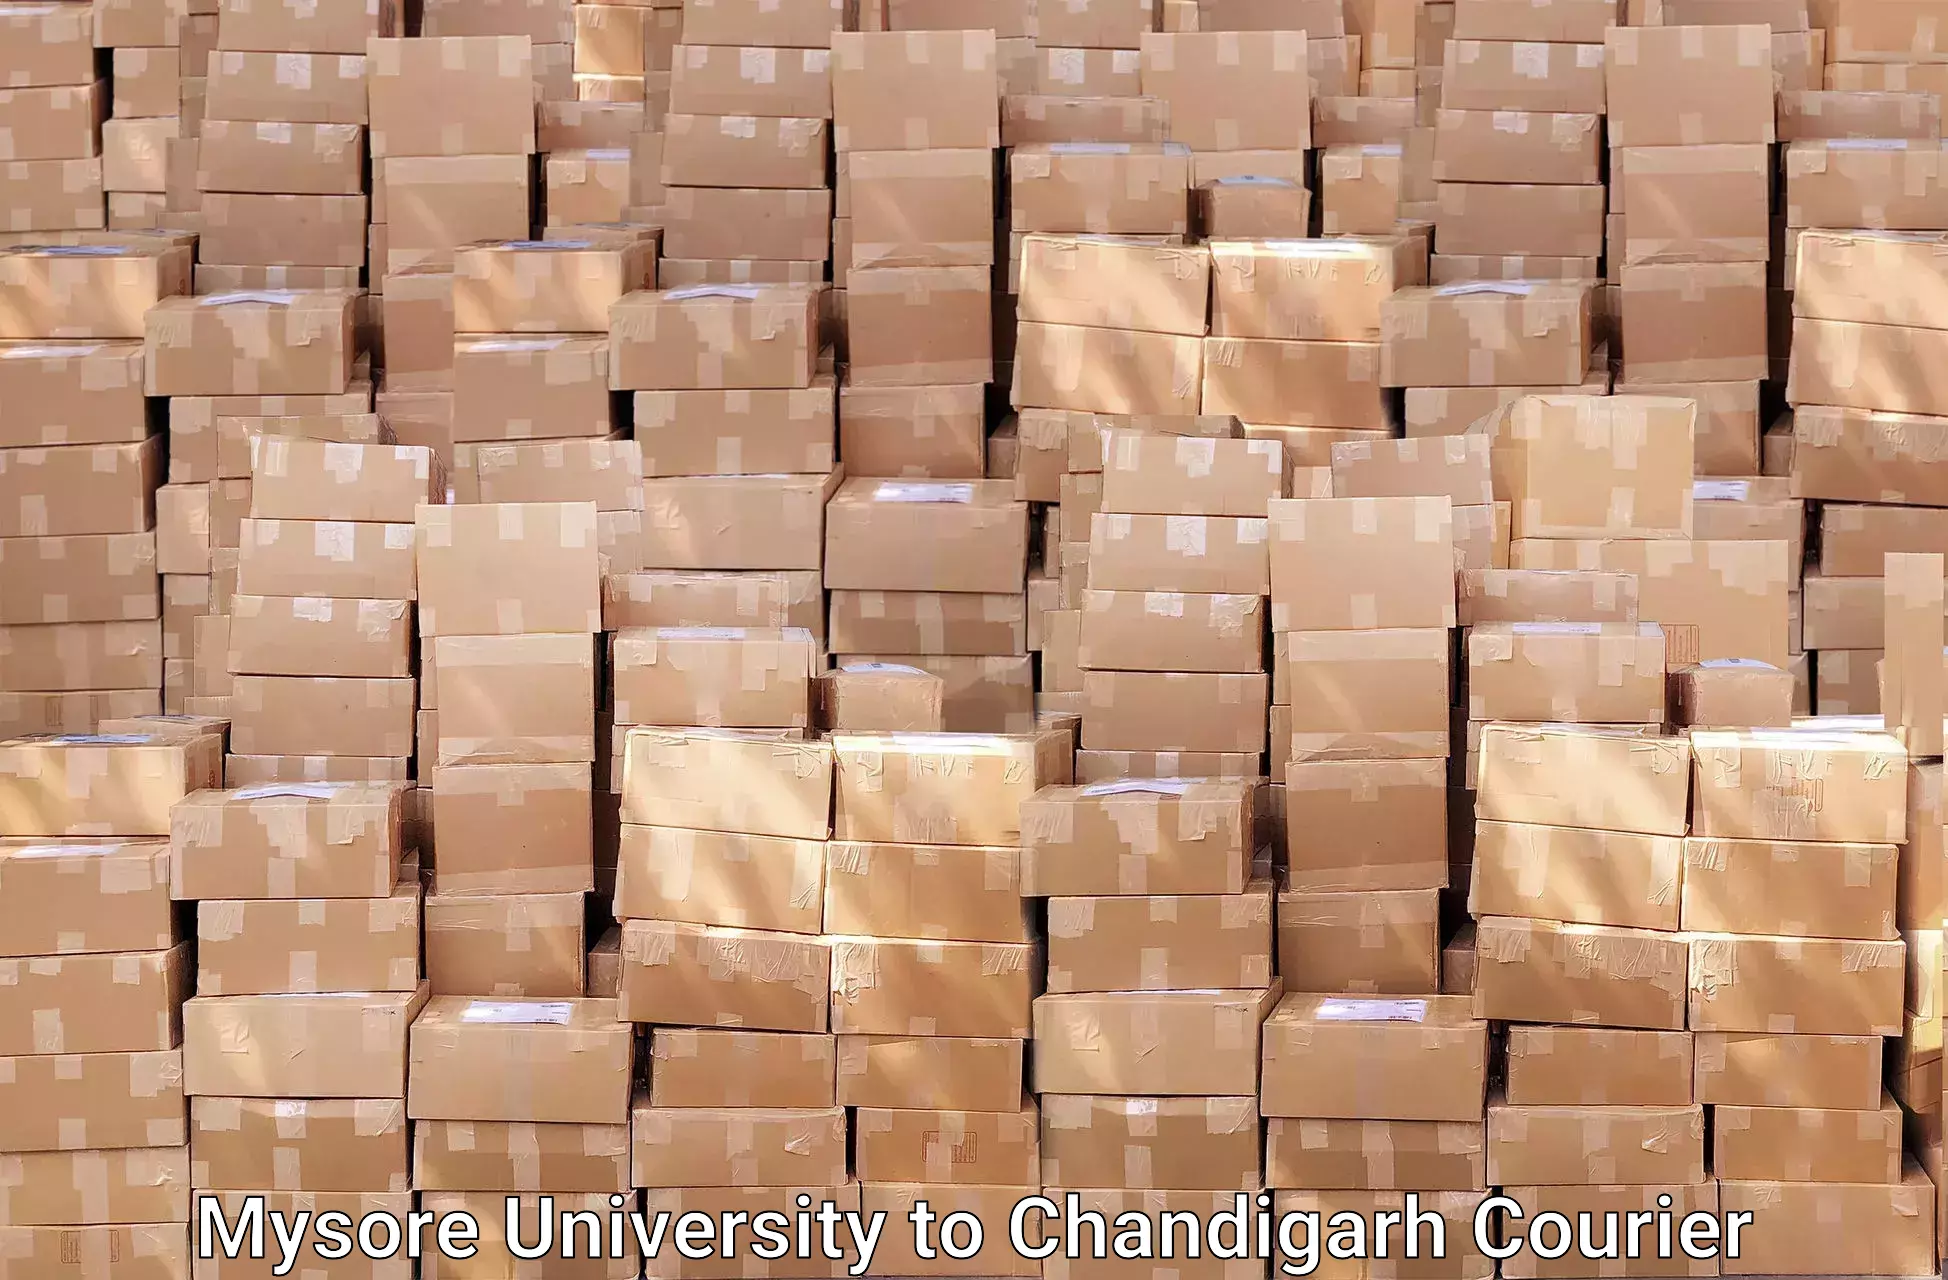 Moving and handling services Mysore University to Chandigarh